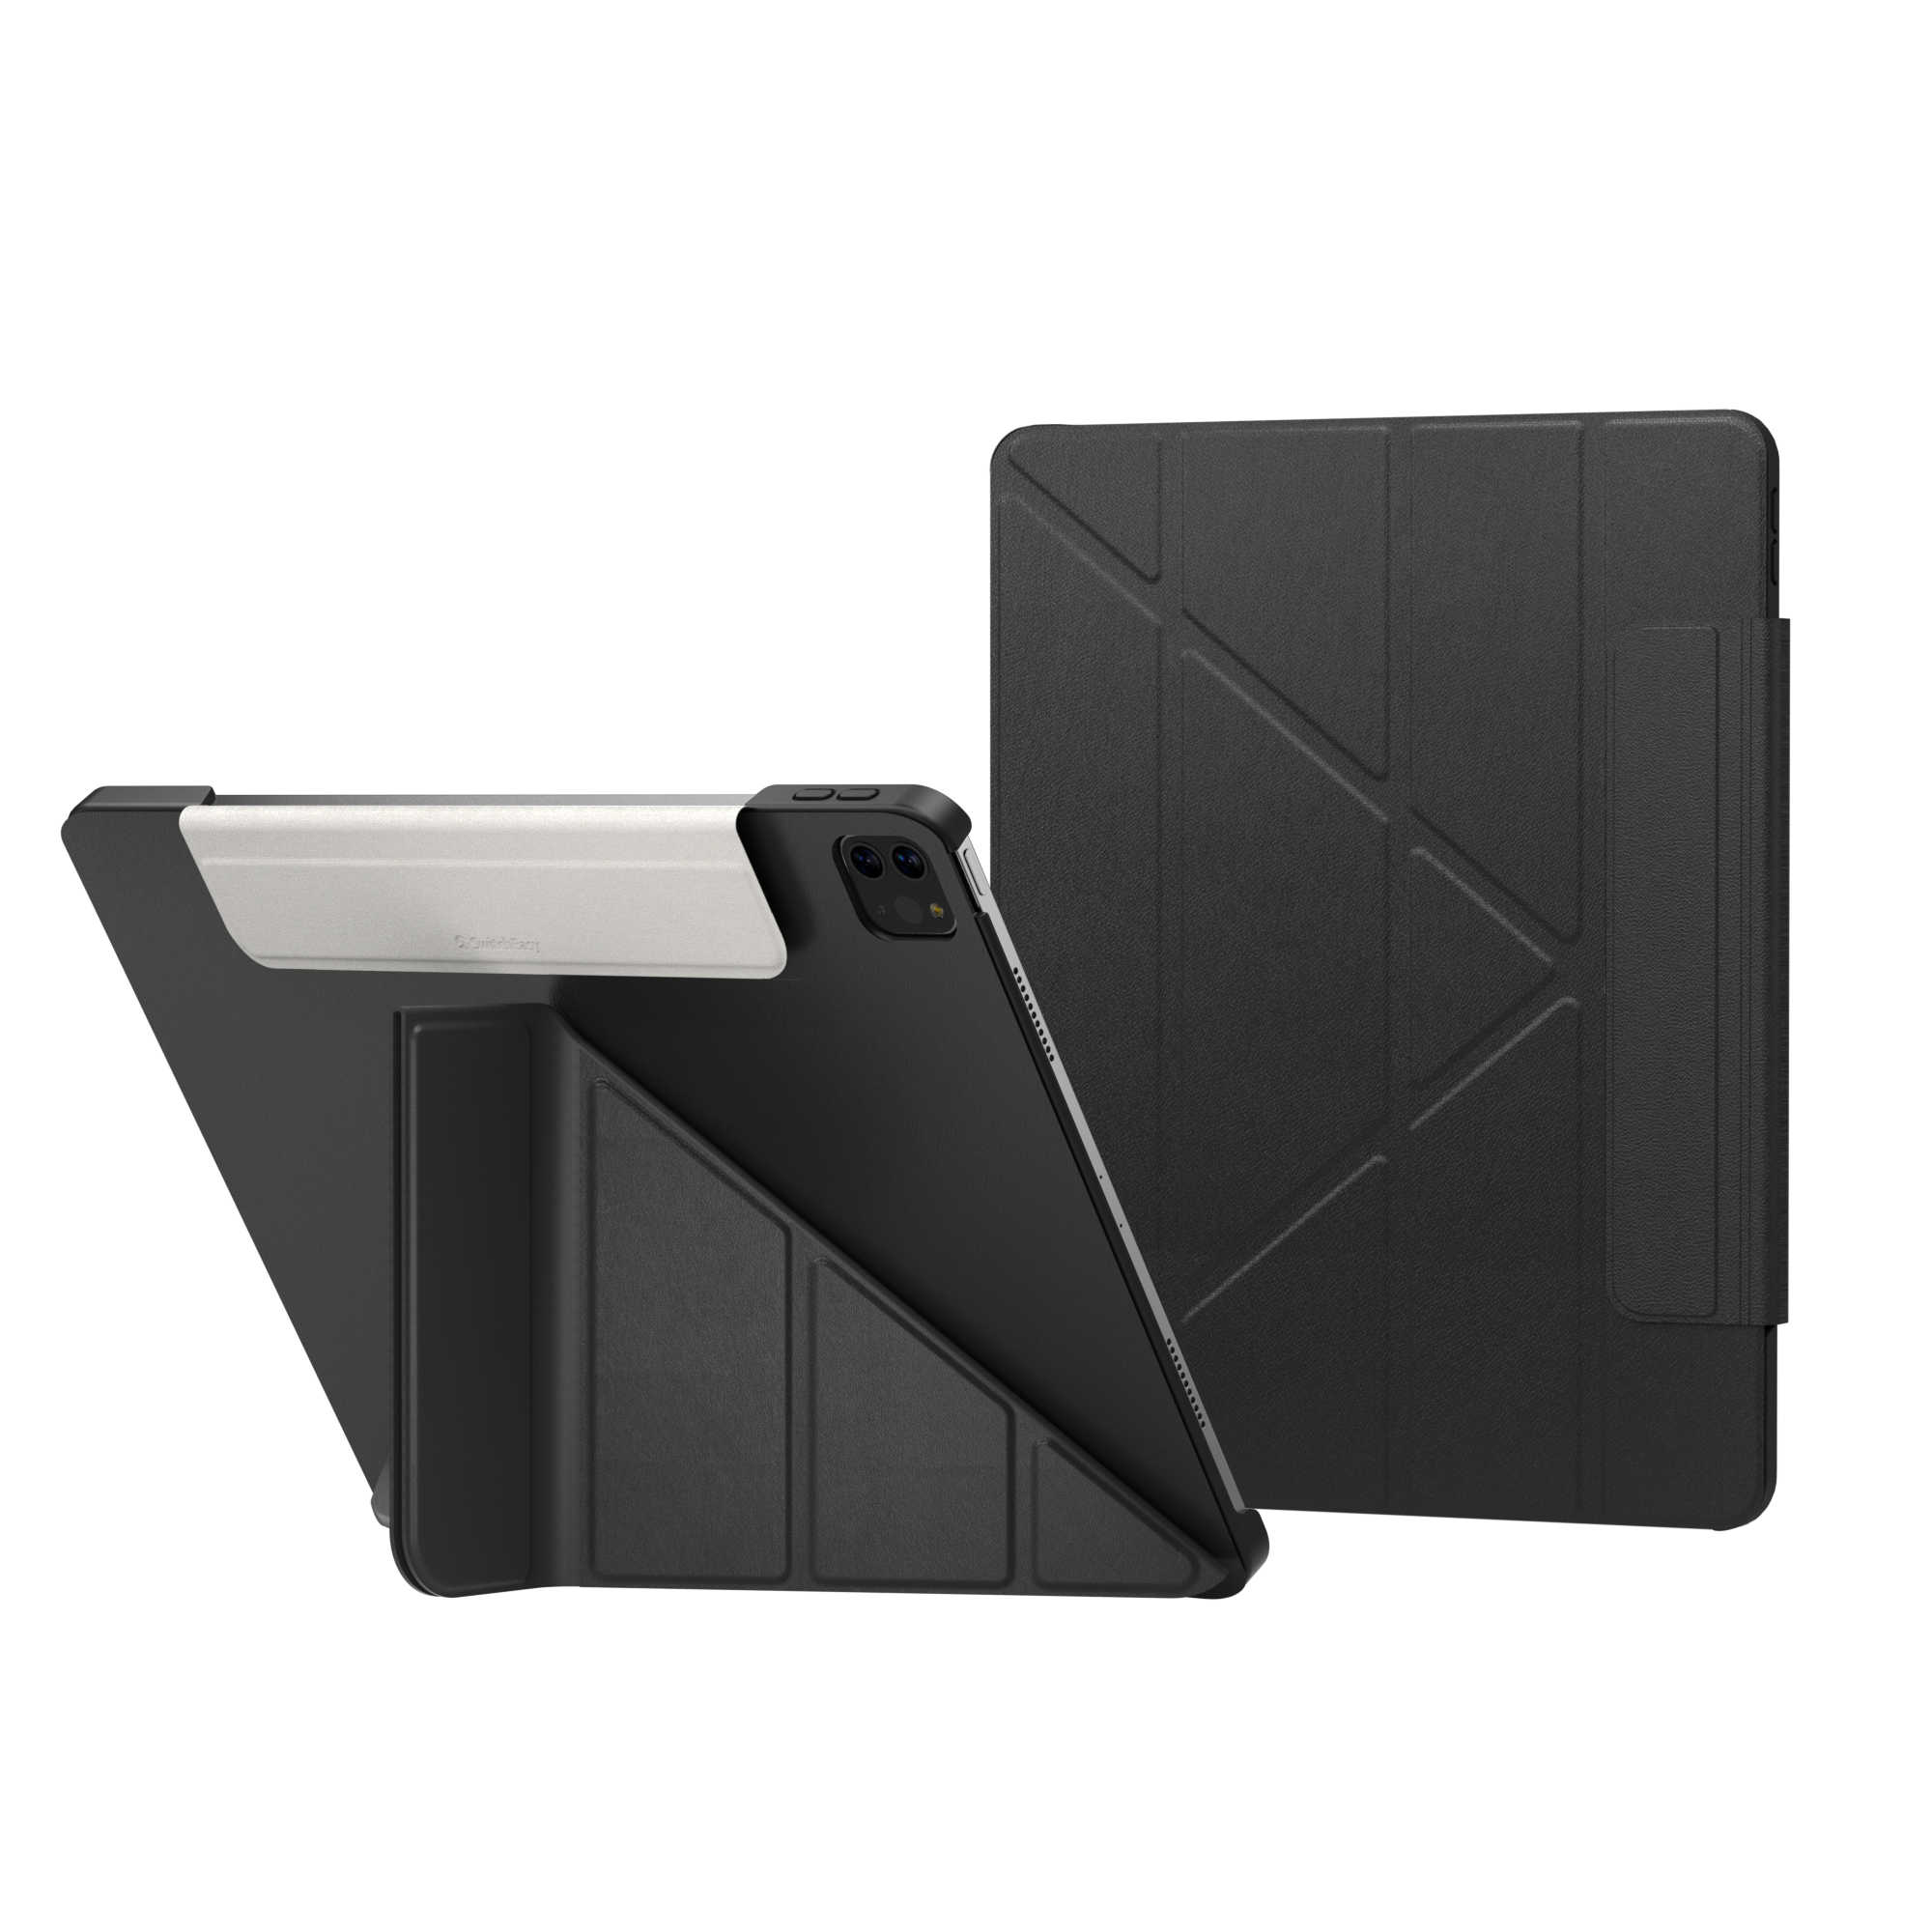 SwitchEasy PaperLike iPad Screen Protector - Cult of Mac Store